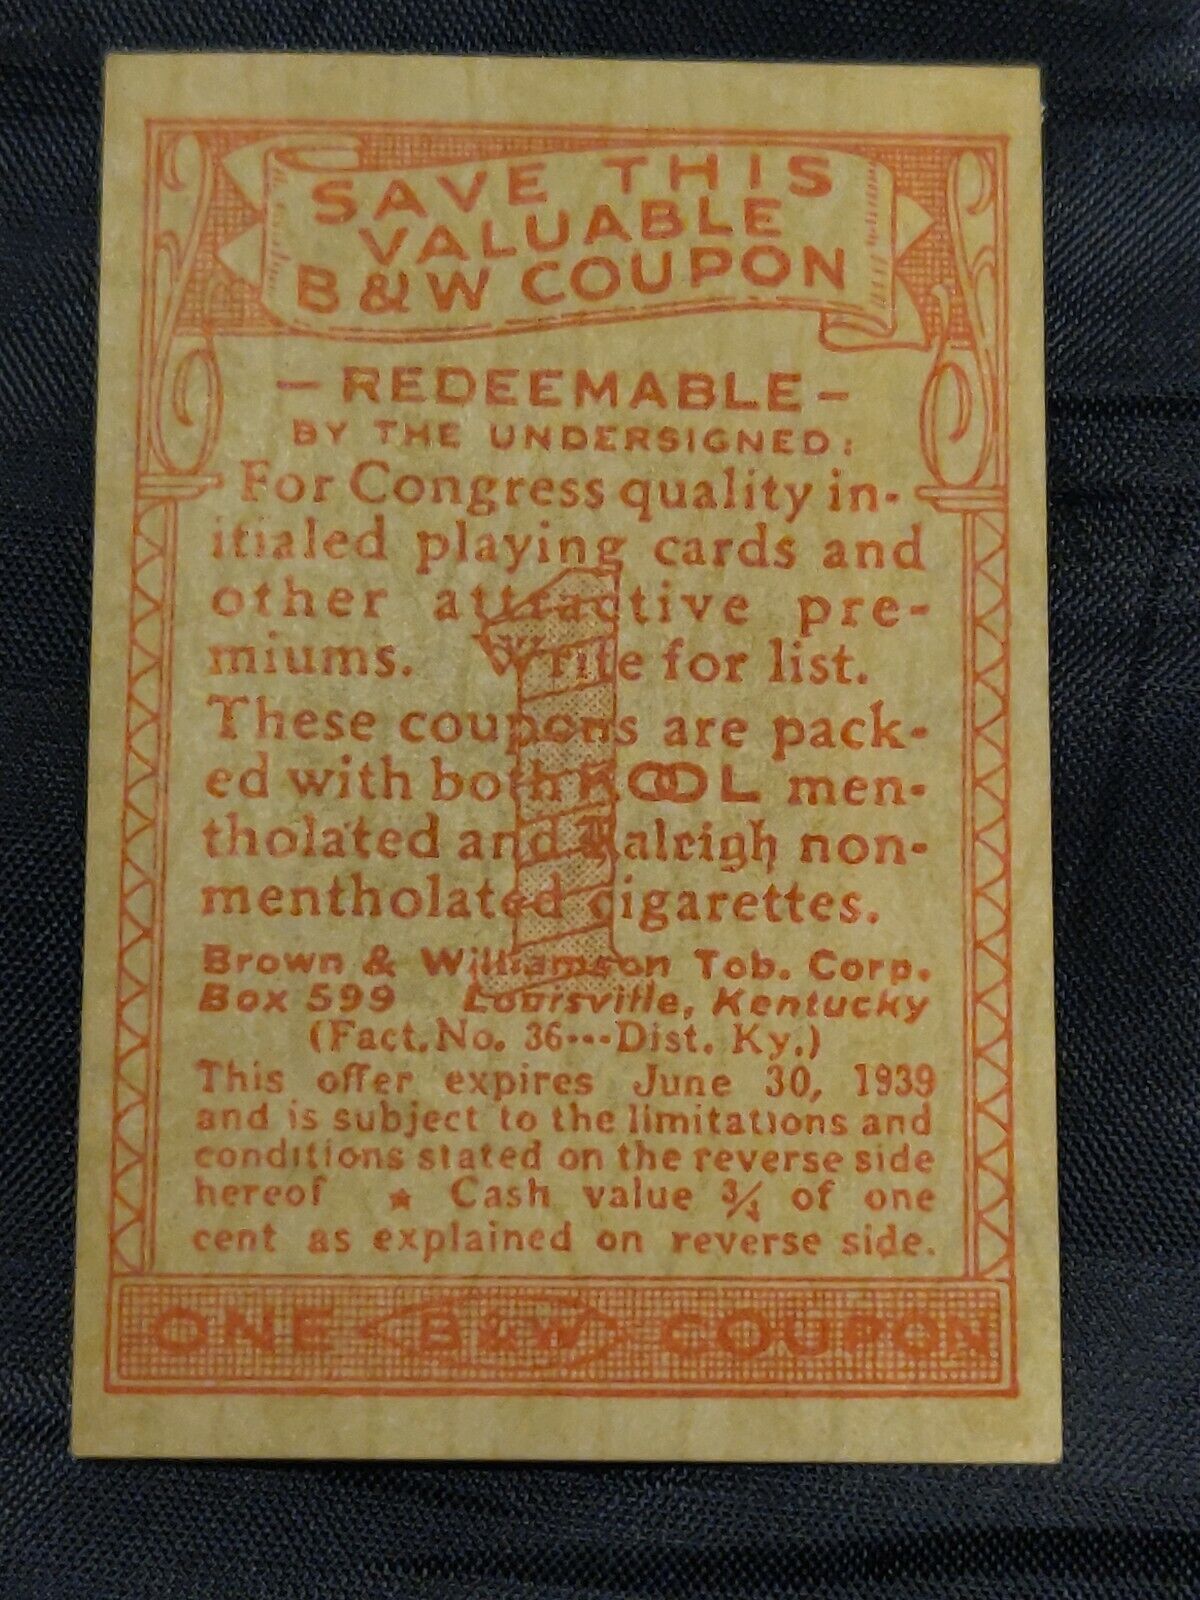 1930s Vintage B & W Playing Cards Coupon